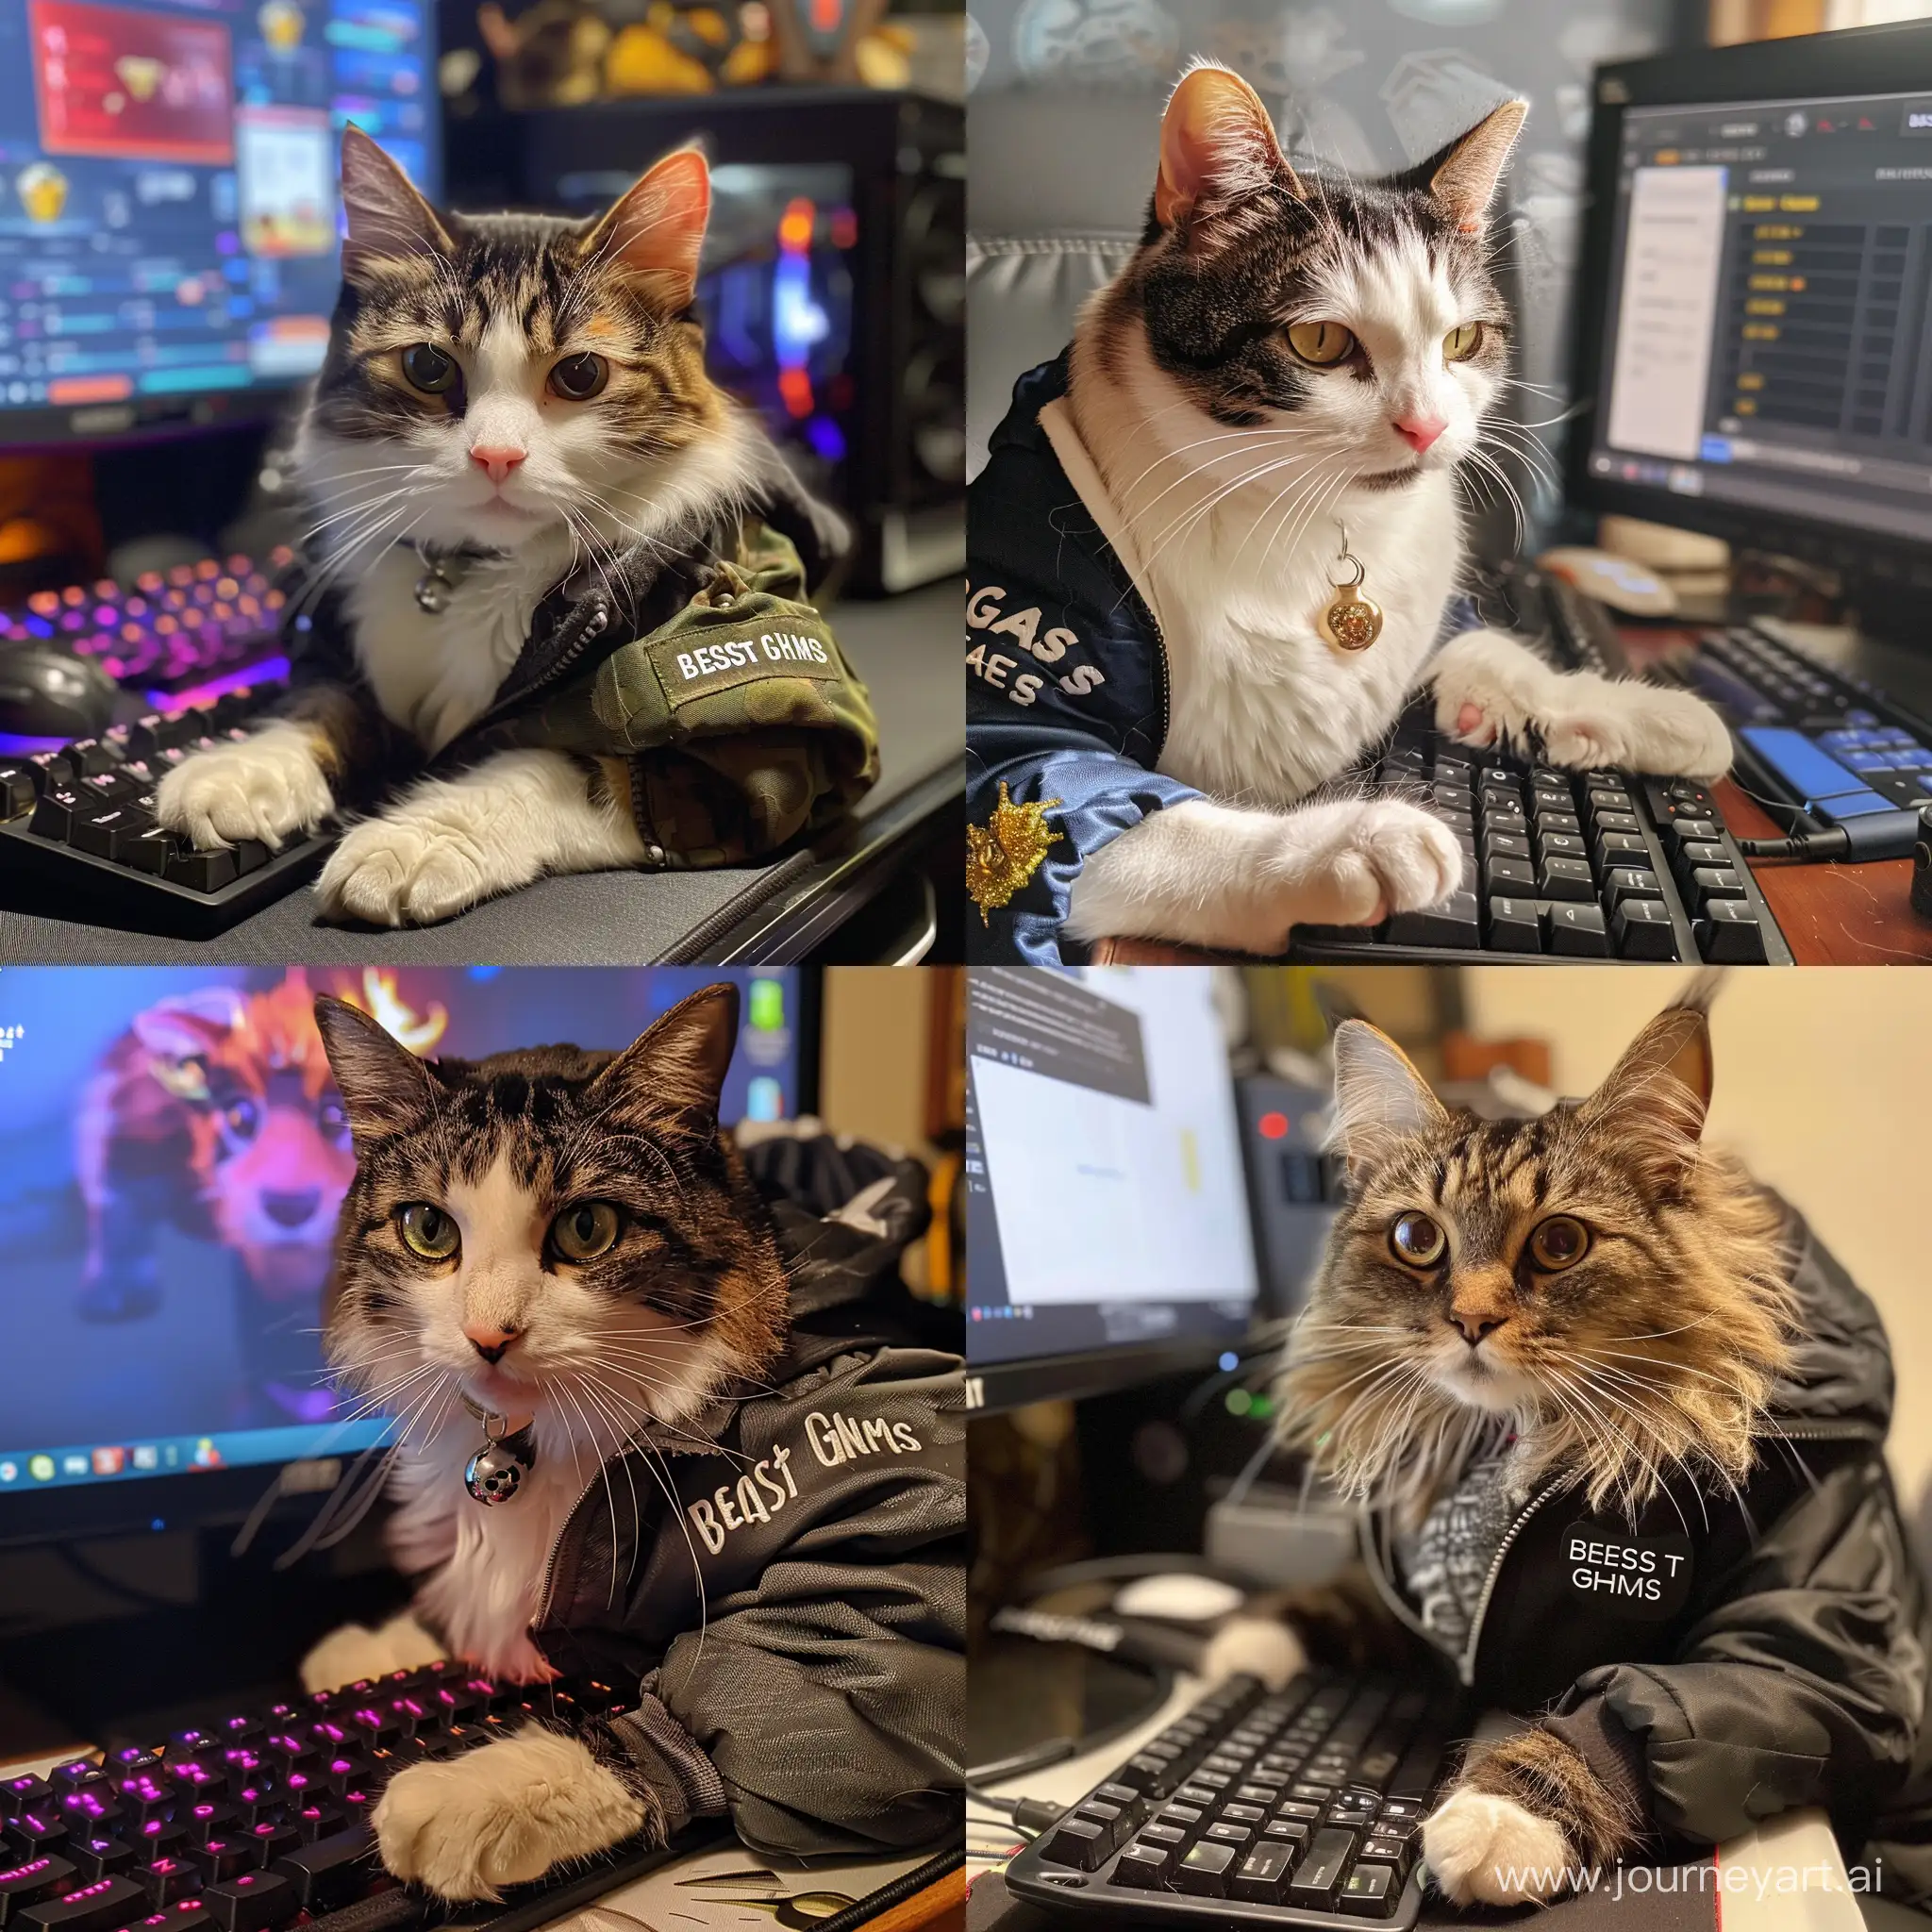 Adorable-Cat-at-Computer-with-Beast-Gems-Jacket